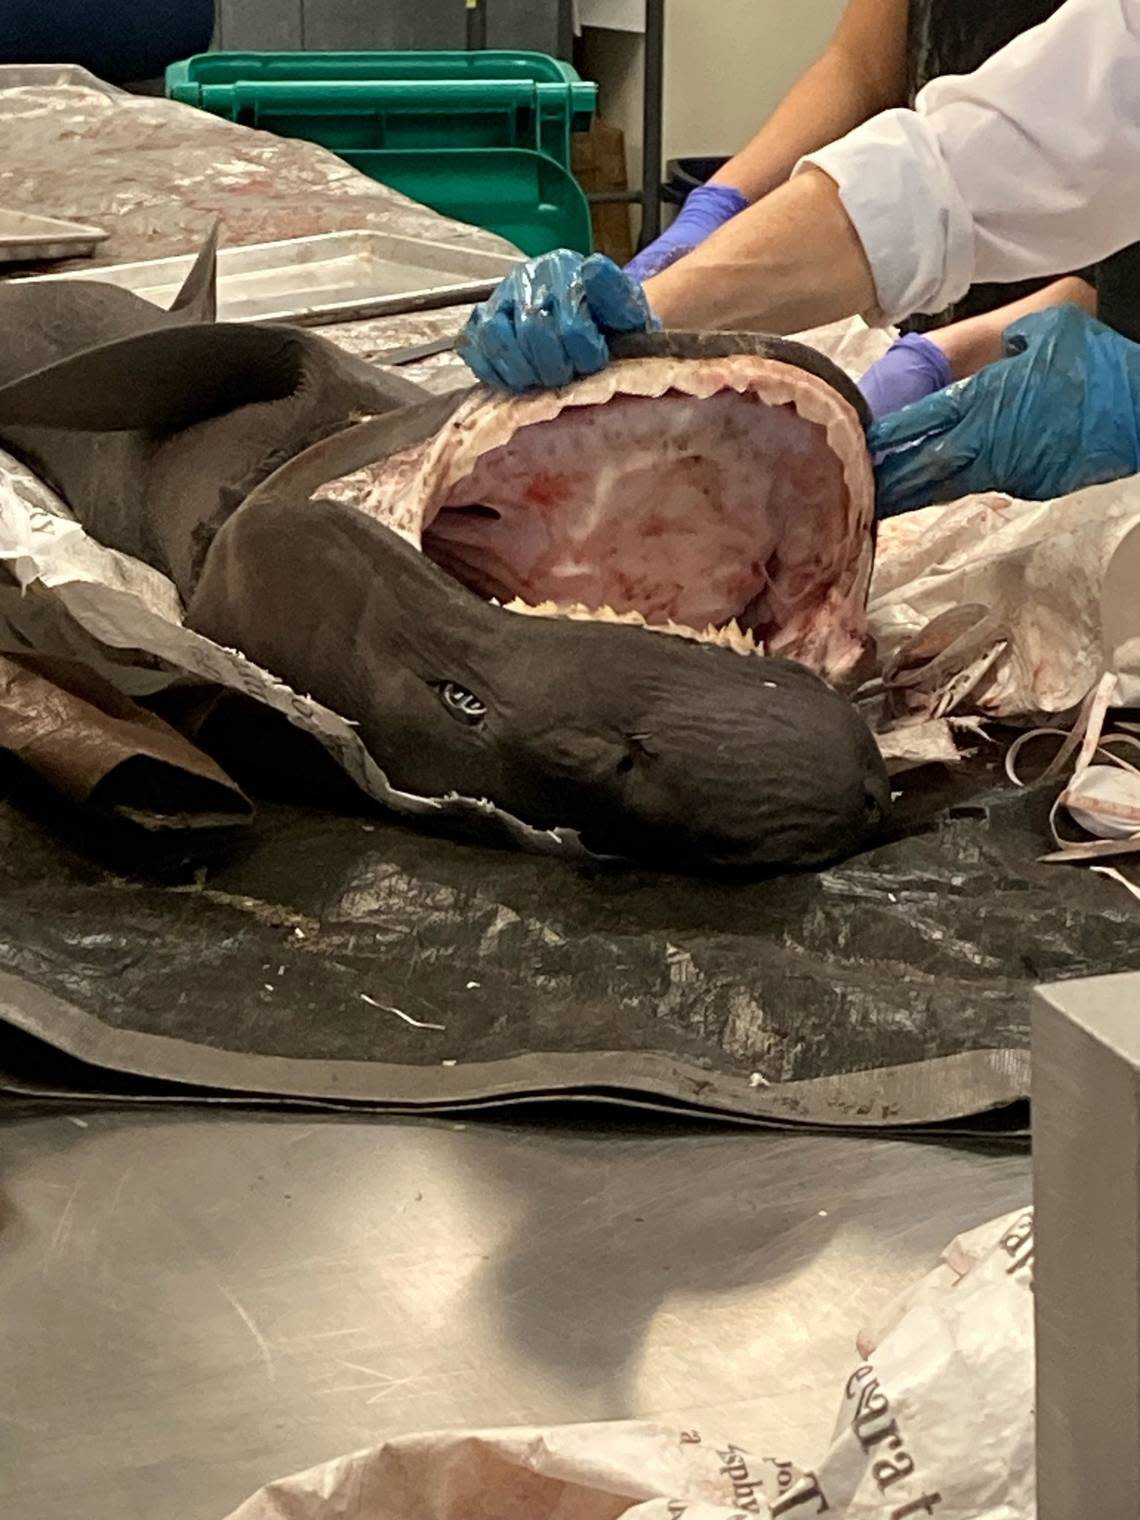 Experts dissect a sixgill shark on a Washington State Department of Fish and Wildlife lab table. They determined she likely made a meal of someone’s bait and was killed during the release process.